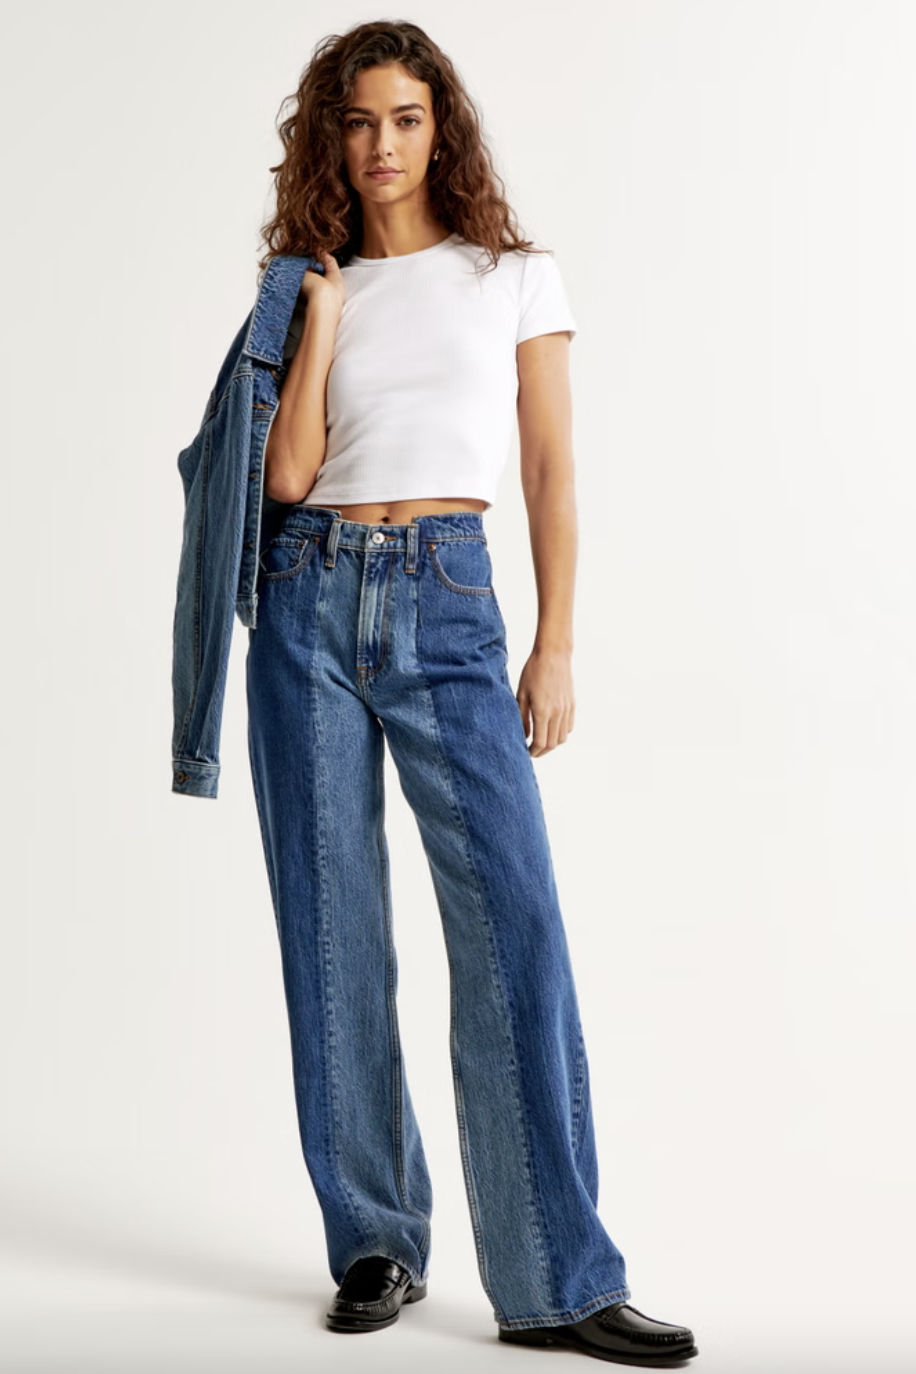 13 Types of Jeans You Need to Own - Best Jean Styles for Women